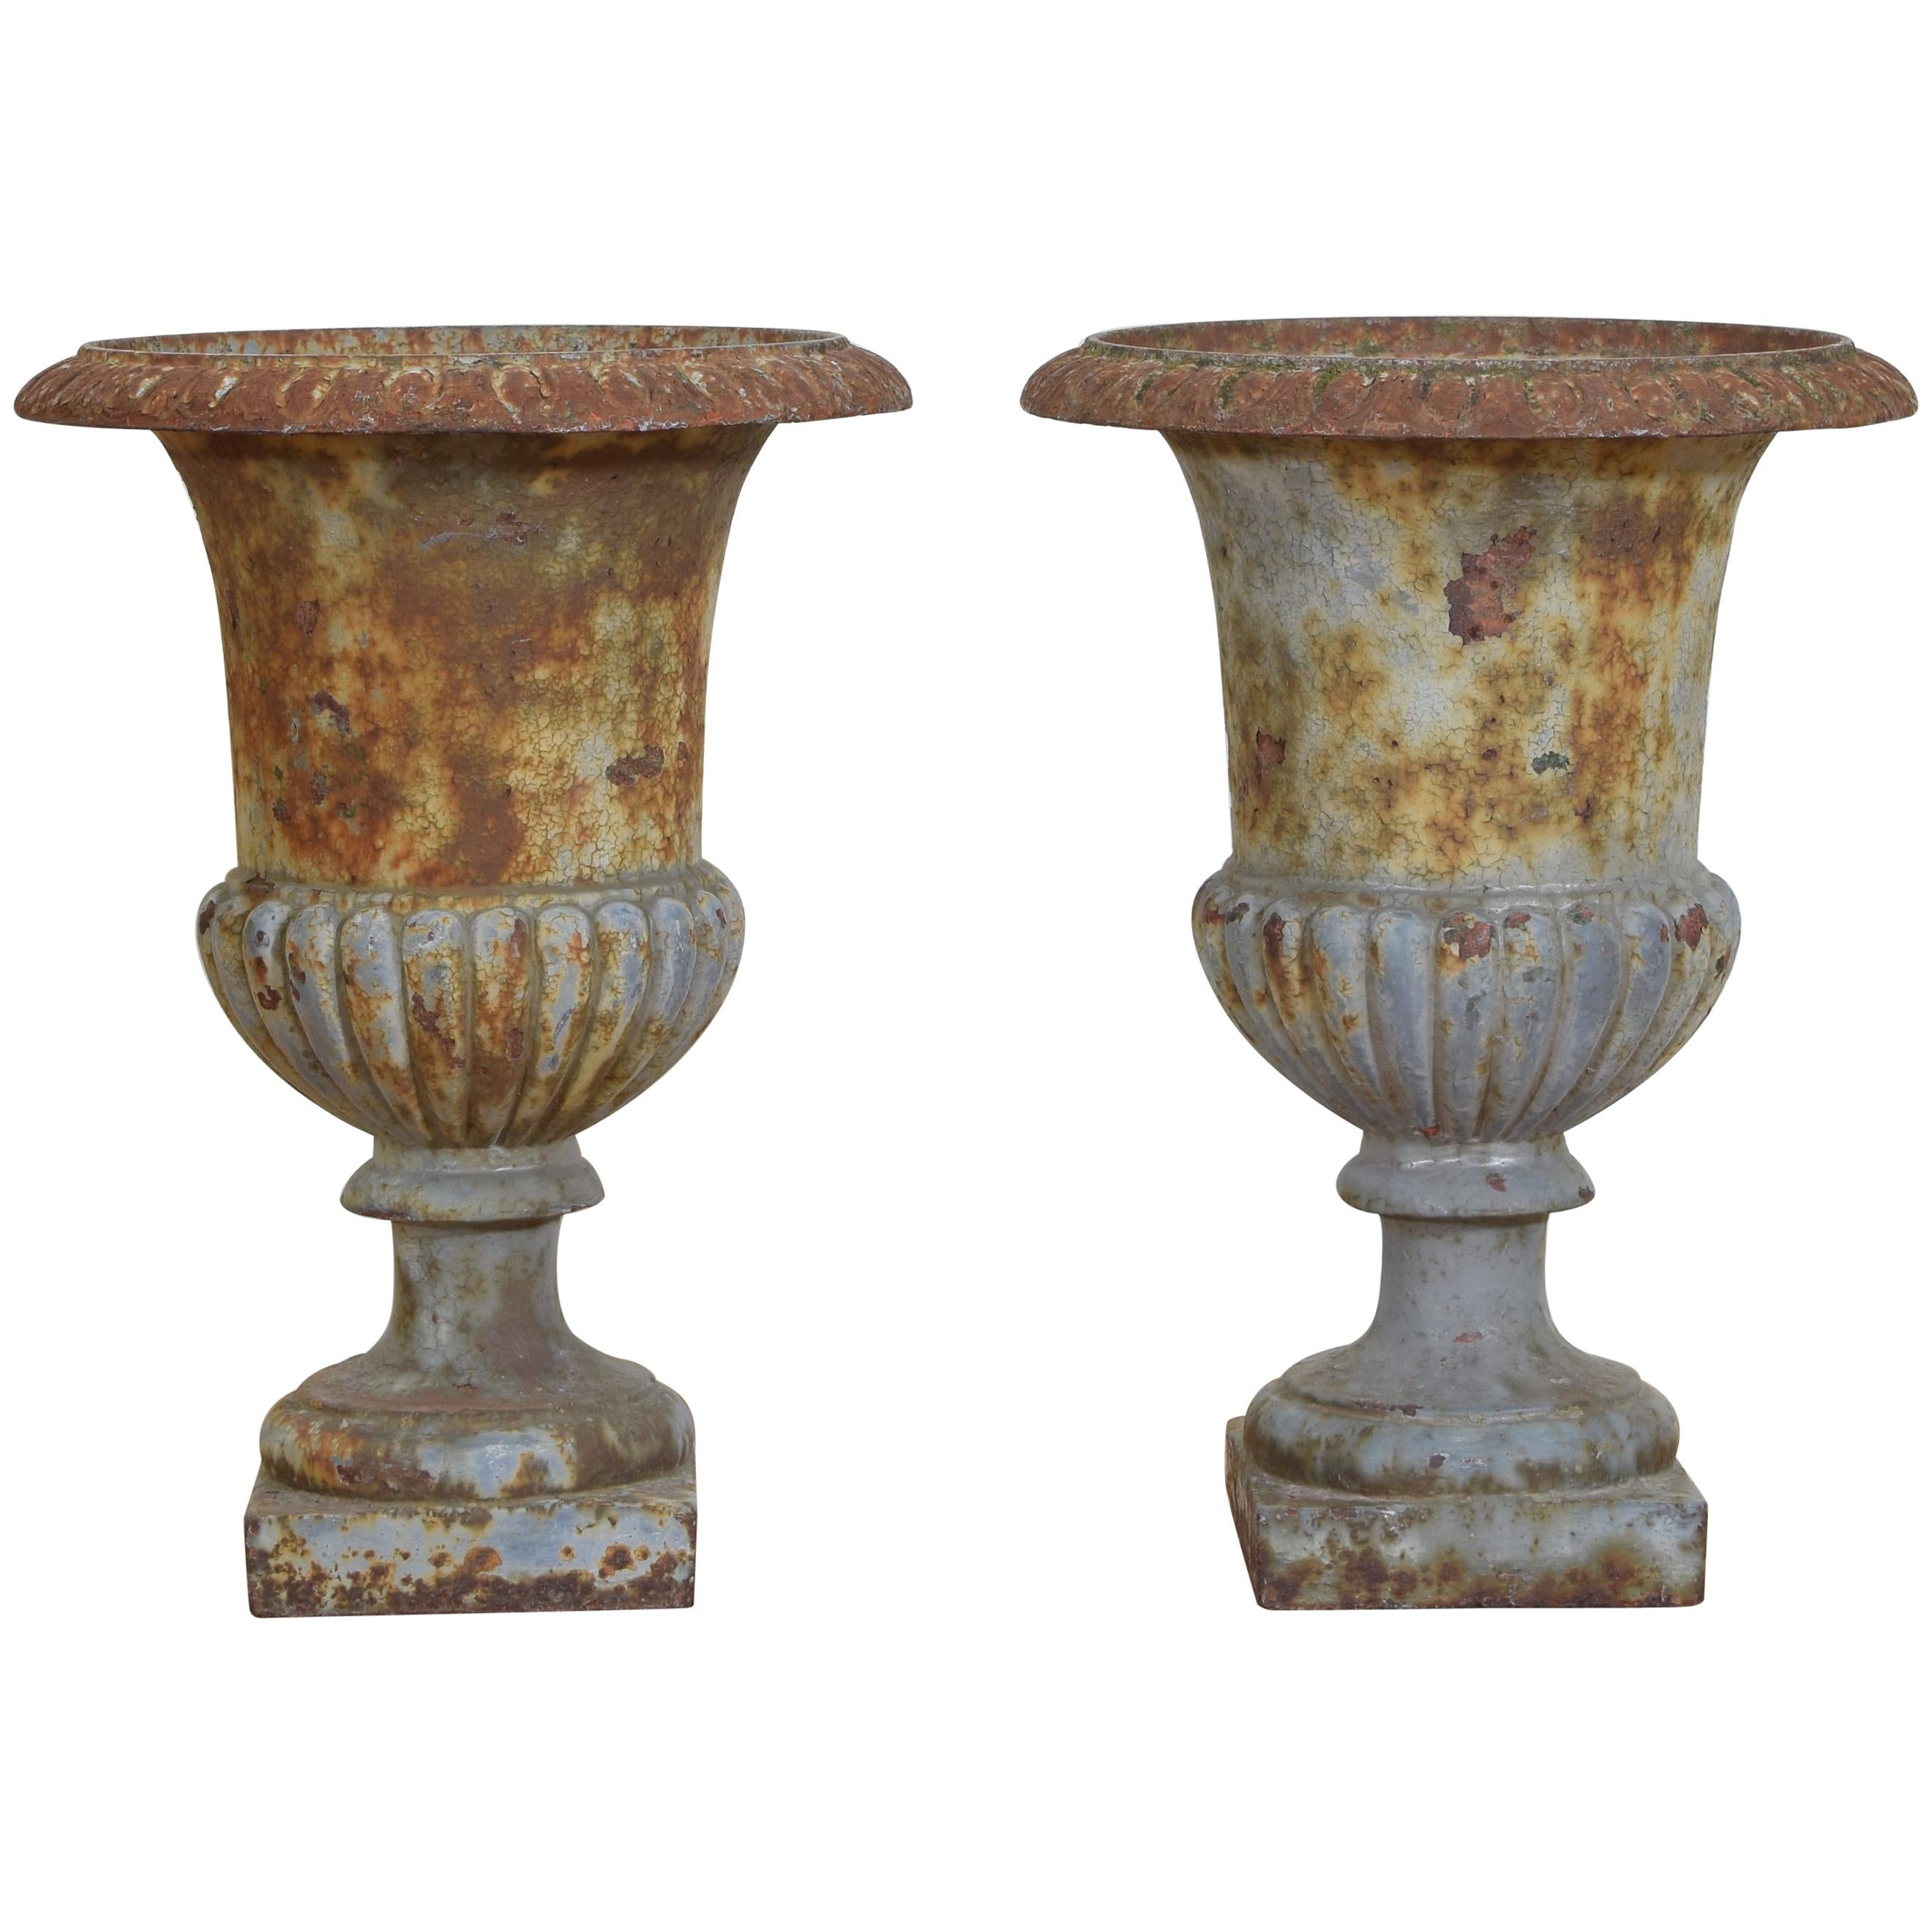 Pair of French Cast Iron and Parcel Painted Campana Form Urns Early 20th Century